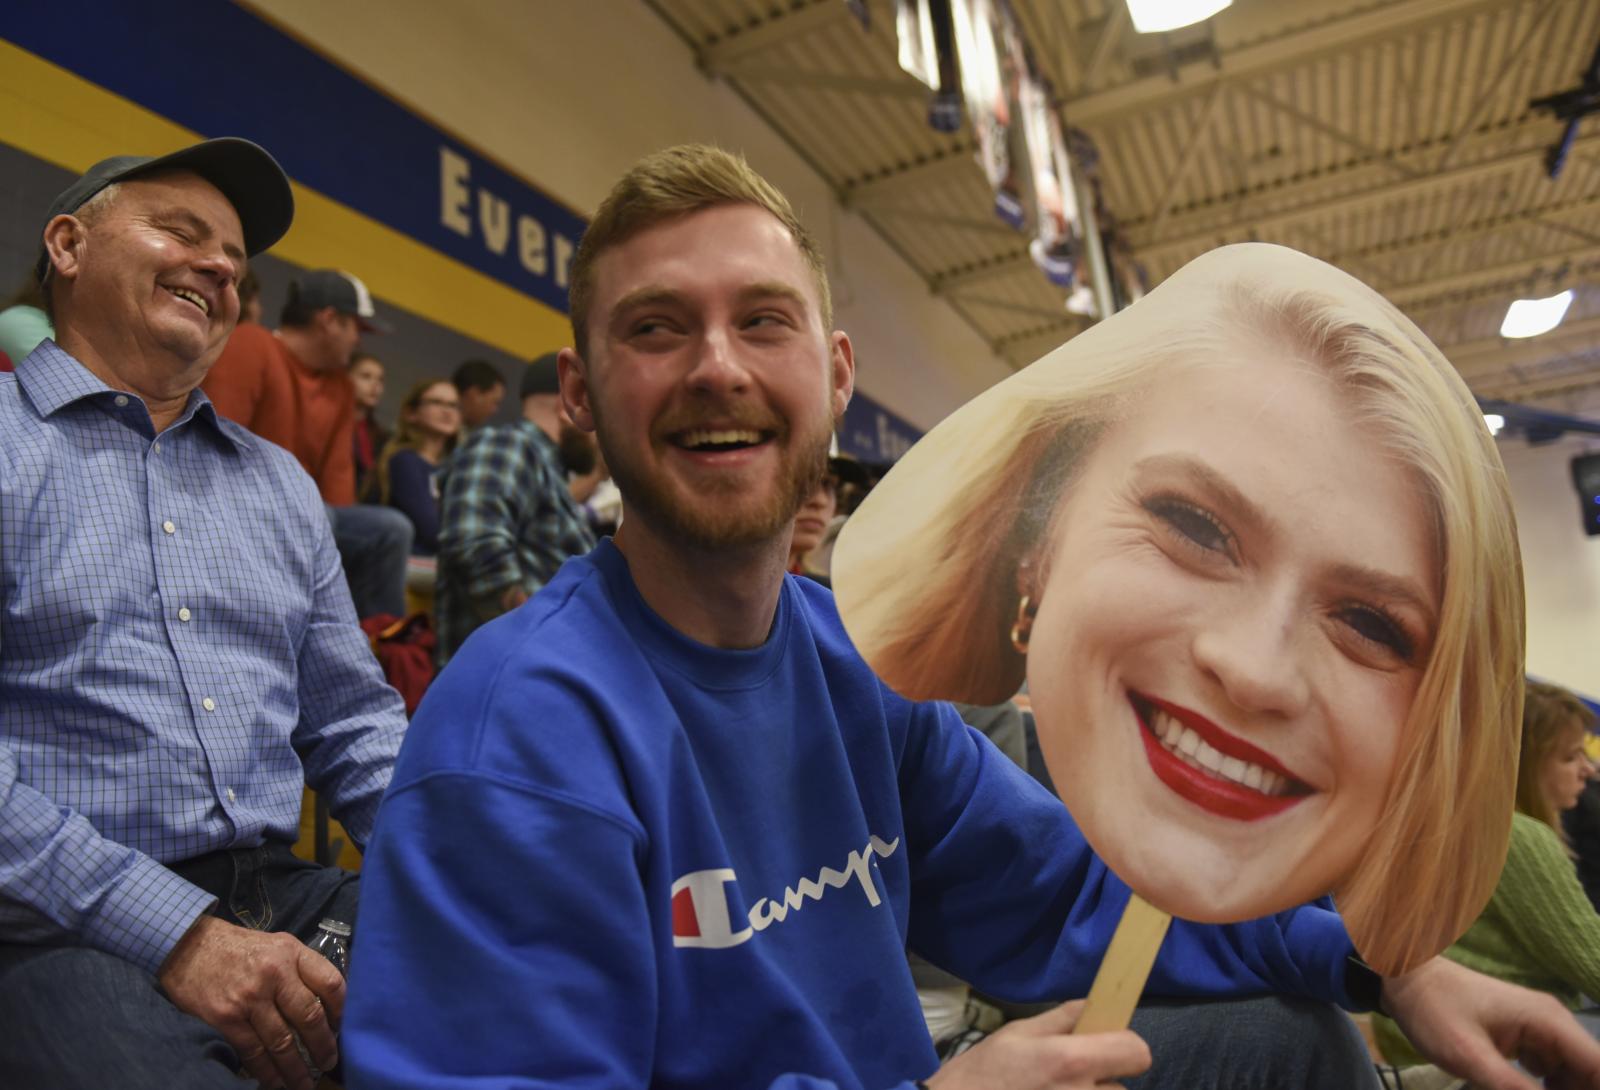 Olathe South faces Olathe West on Friday, Feb. 21, 2020 at Olathe South High School in Olathe, Kan. It was senior night for the Falcons, who bore a tough loss to the Owls. Emmalee Reed 